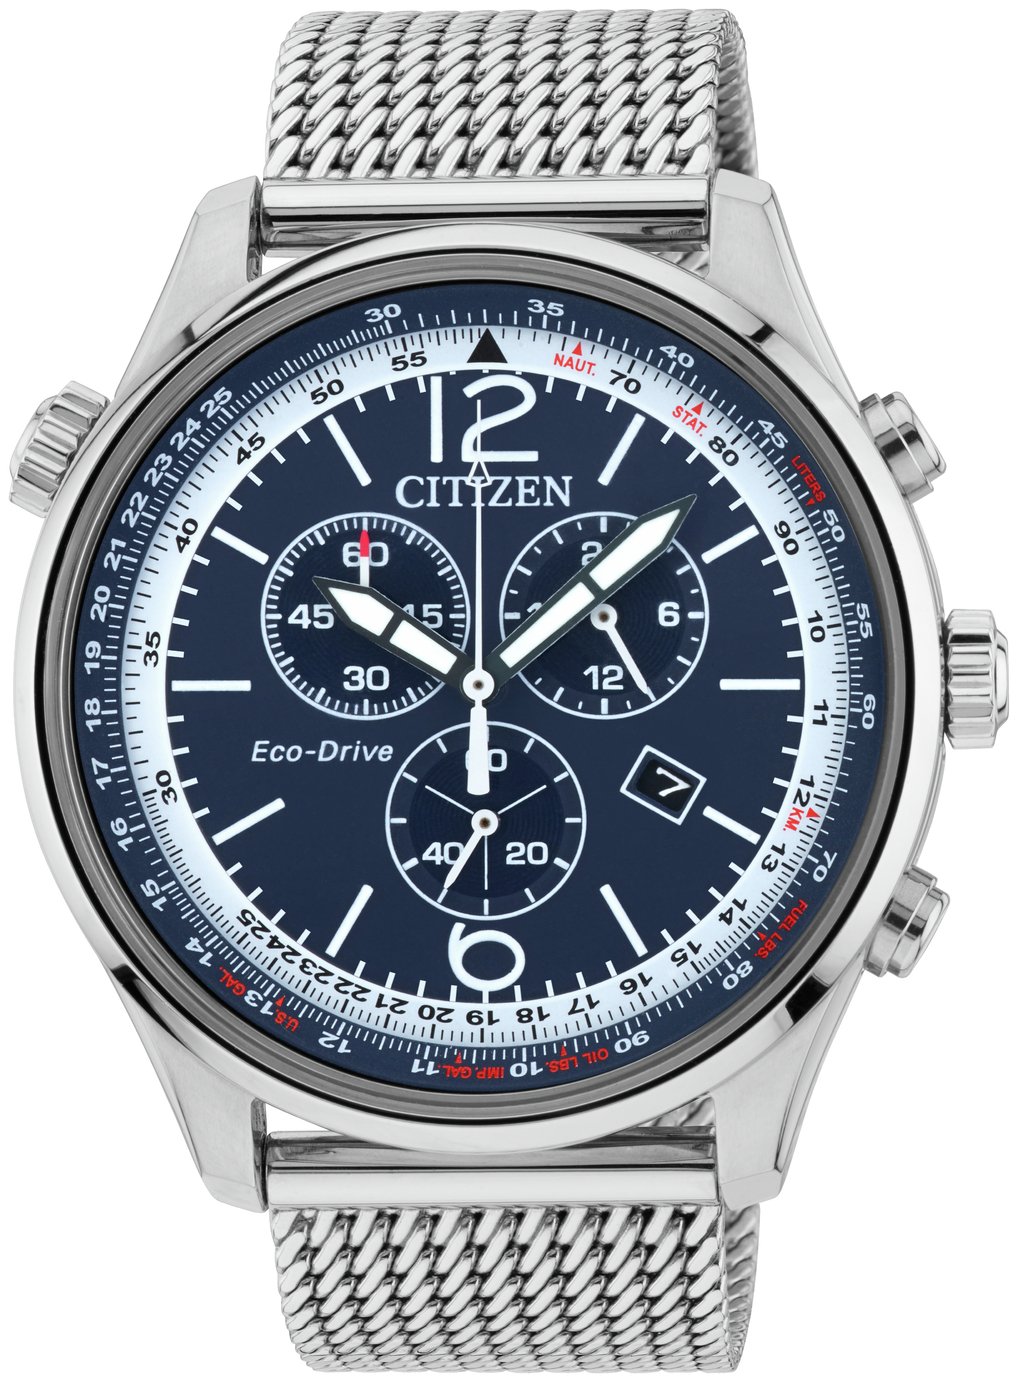 Citizen Eco-Drive Men's Stainless Steel Chronograph Watch (5385878 Citizen Stainless Steel Watch Eco Drive